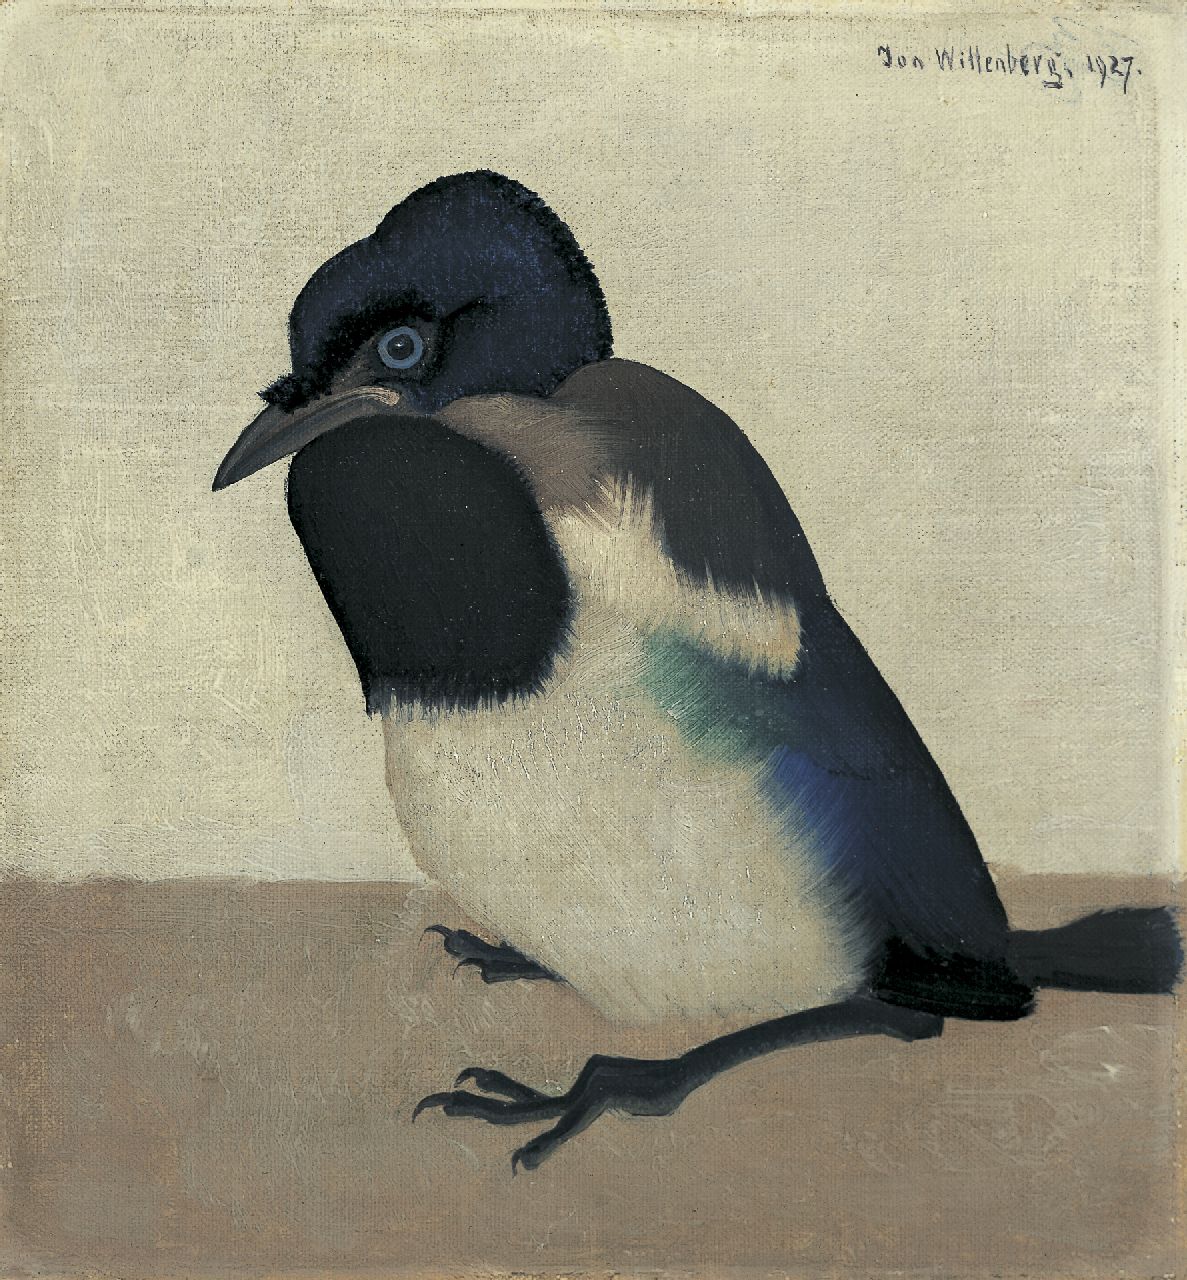 Wittenberg J.H.W.  | 'Jan' Hendrik Willem Wittenberg, A young Magpie, oil on canvas laid down on panel 17.0 x 16.0 cm, signed u.r. and dated 1927